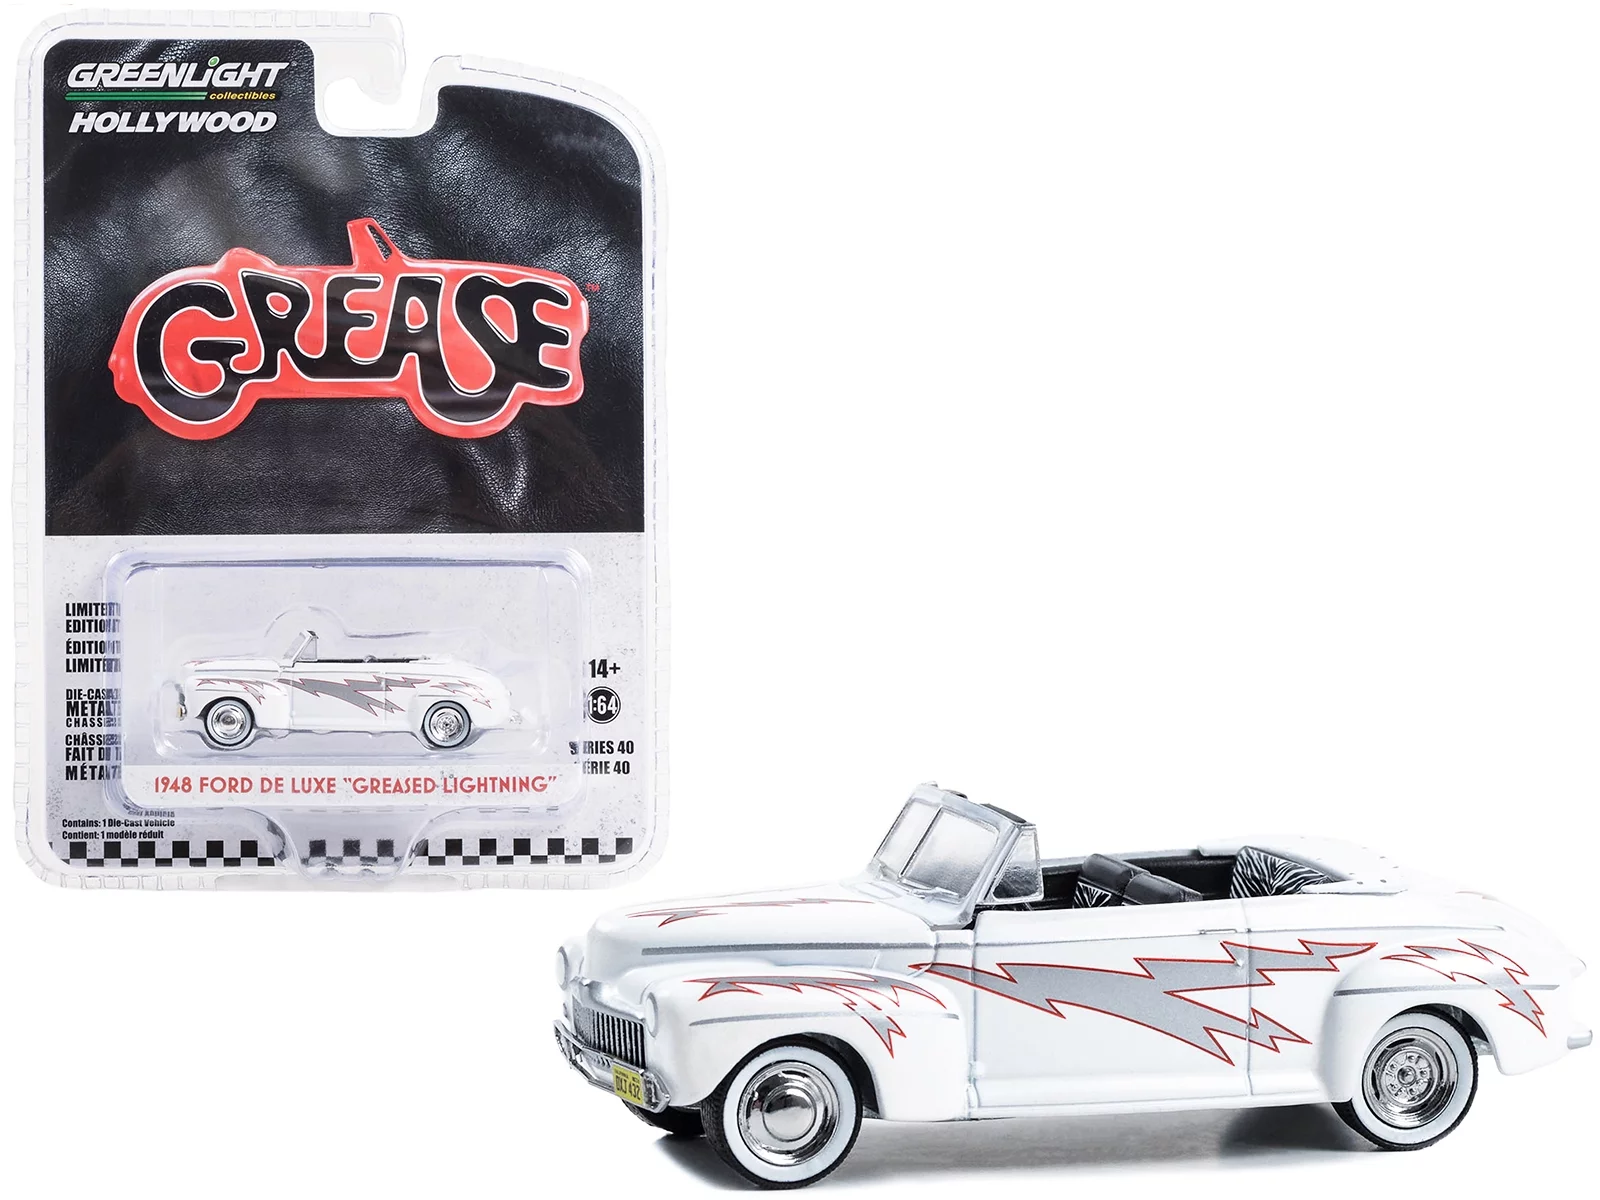 Greenlight 1/64 Hollywood Series 40- Grease (1978) - 1948 Ford De Luxe Convertible Greased Lightnin' 62010-A